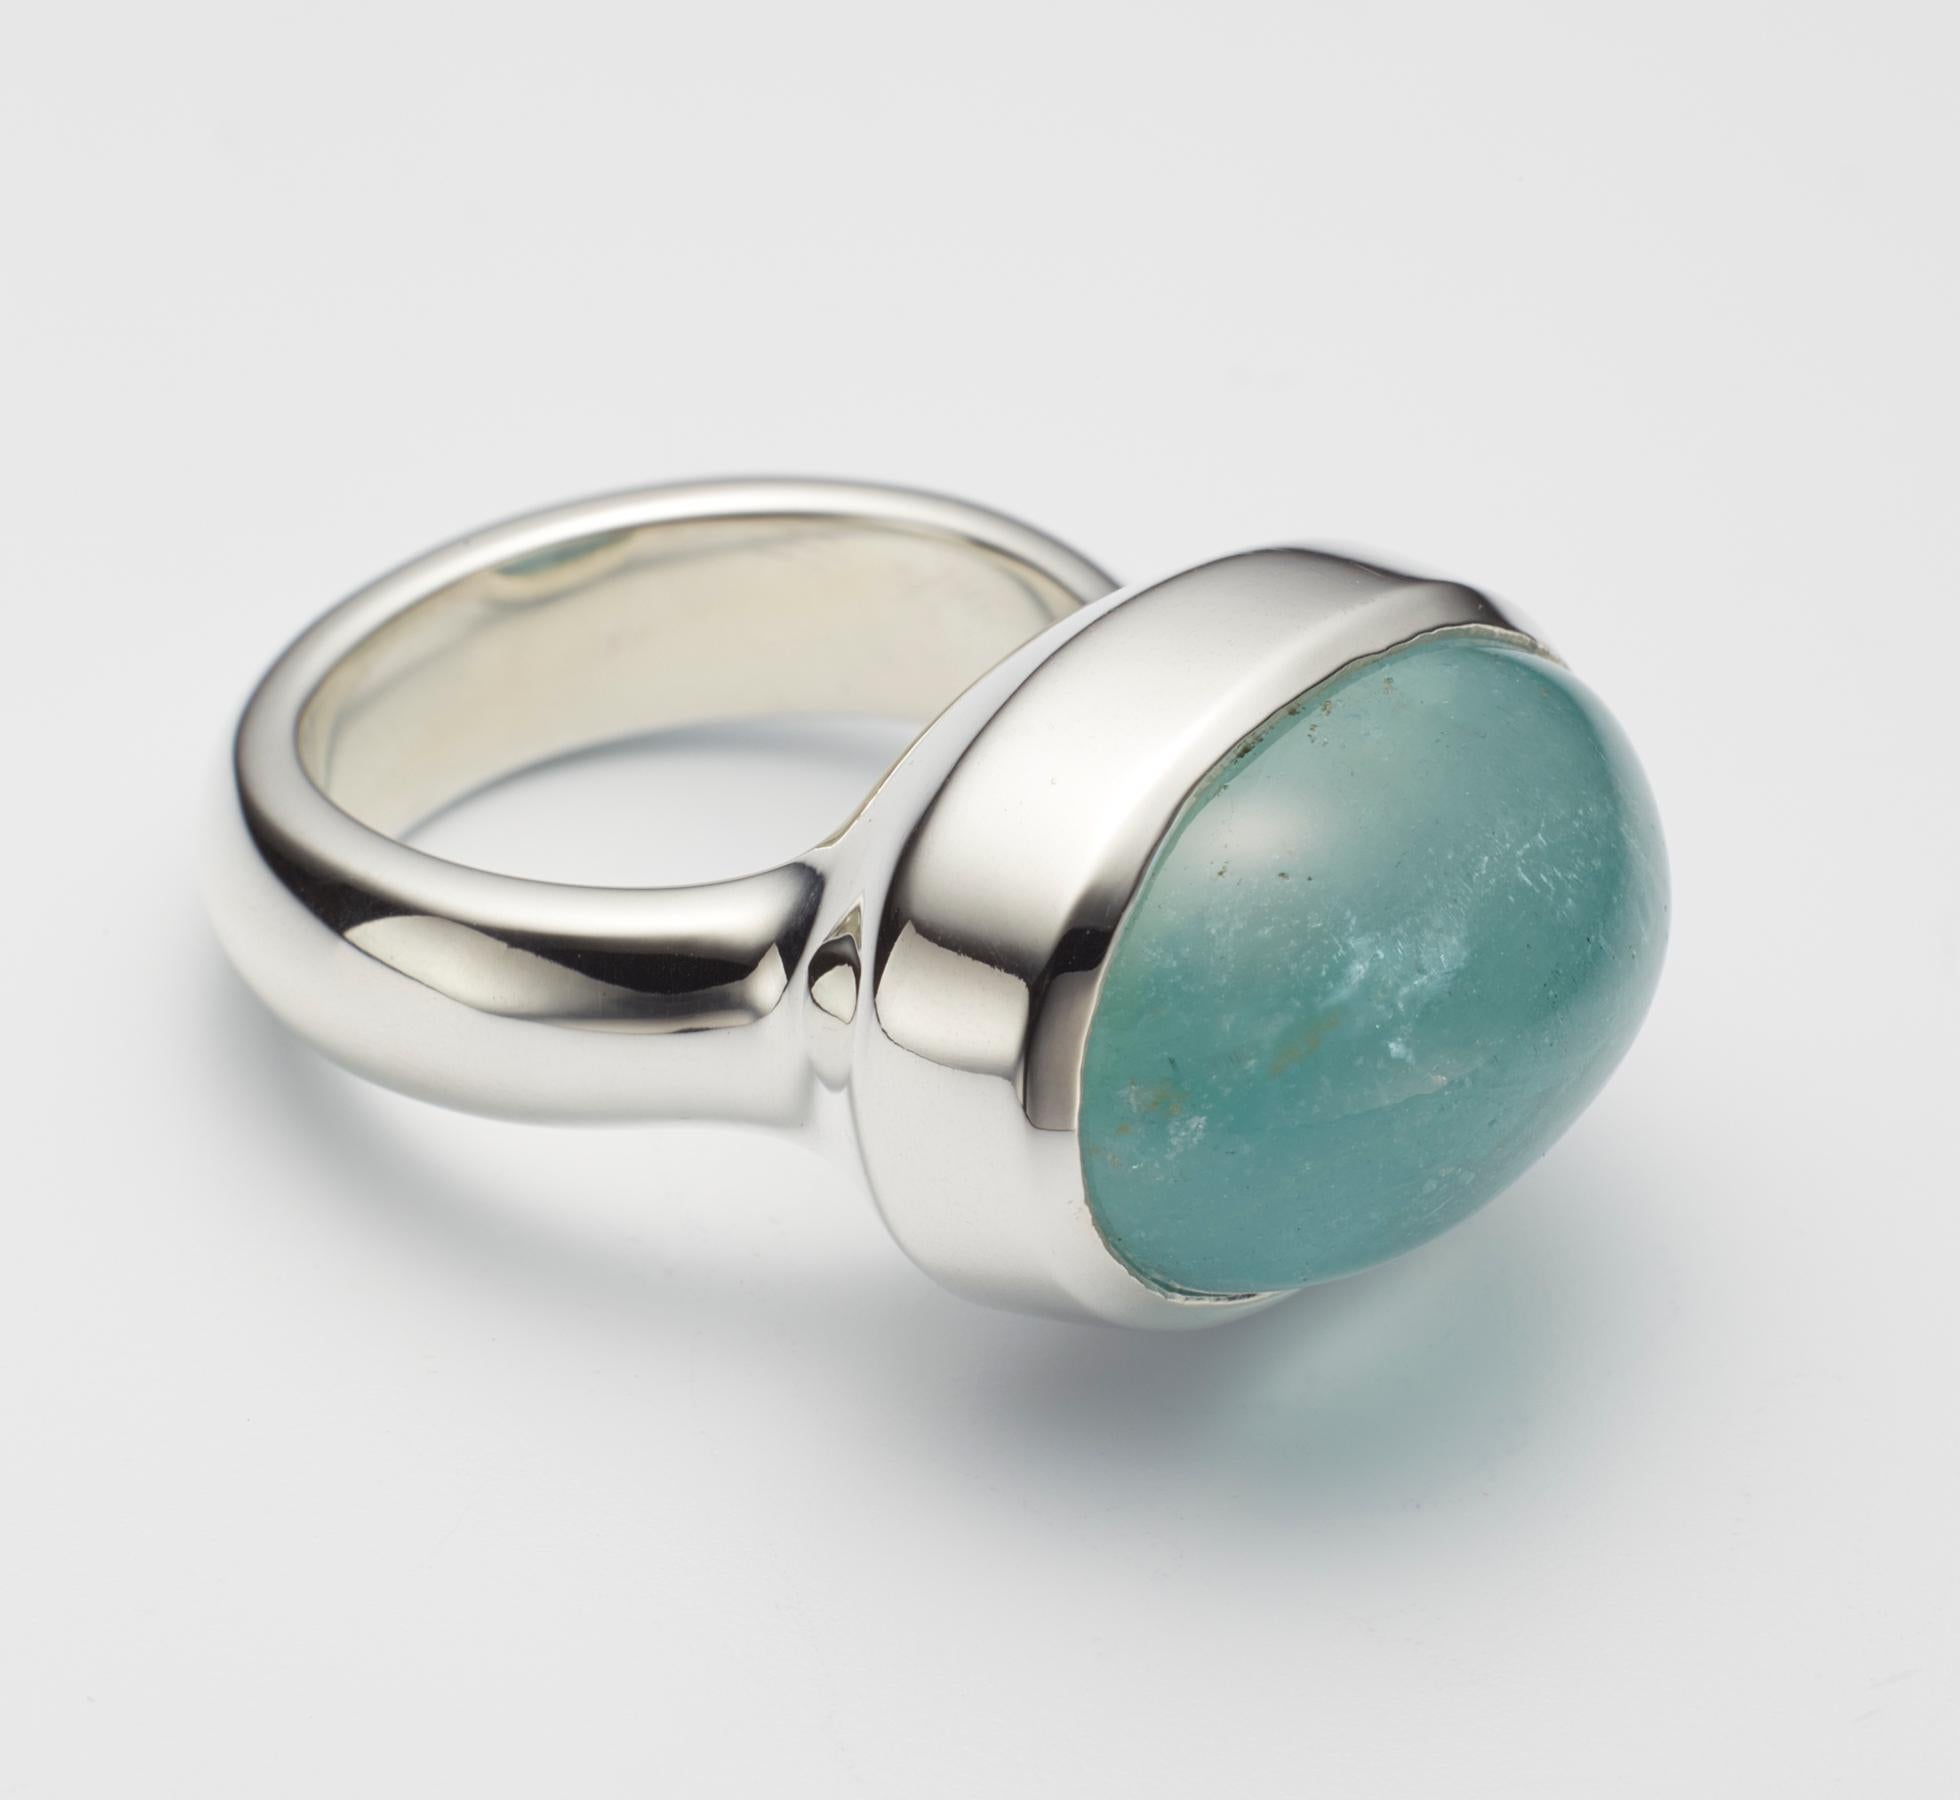 One of a kind aquamarine cabochon sterling silver ring, hand made by jeweler Christopher Phelan.
Aquamarine cabochon size 20 x 15 millimeter.
Width of band 5.6 millimeter.
Ring size 6.
